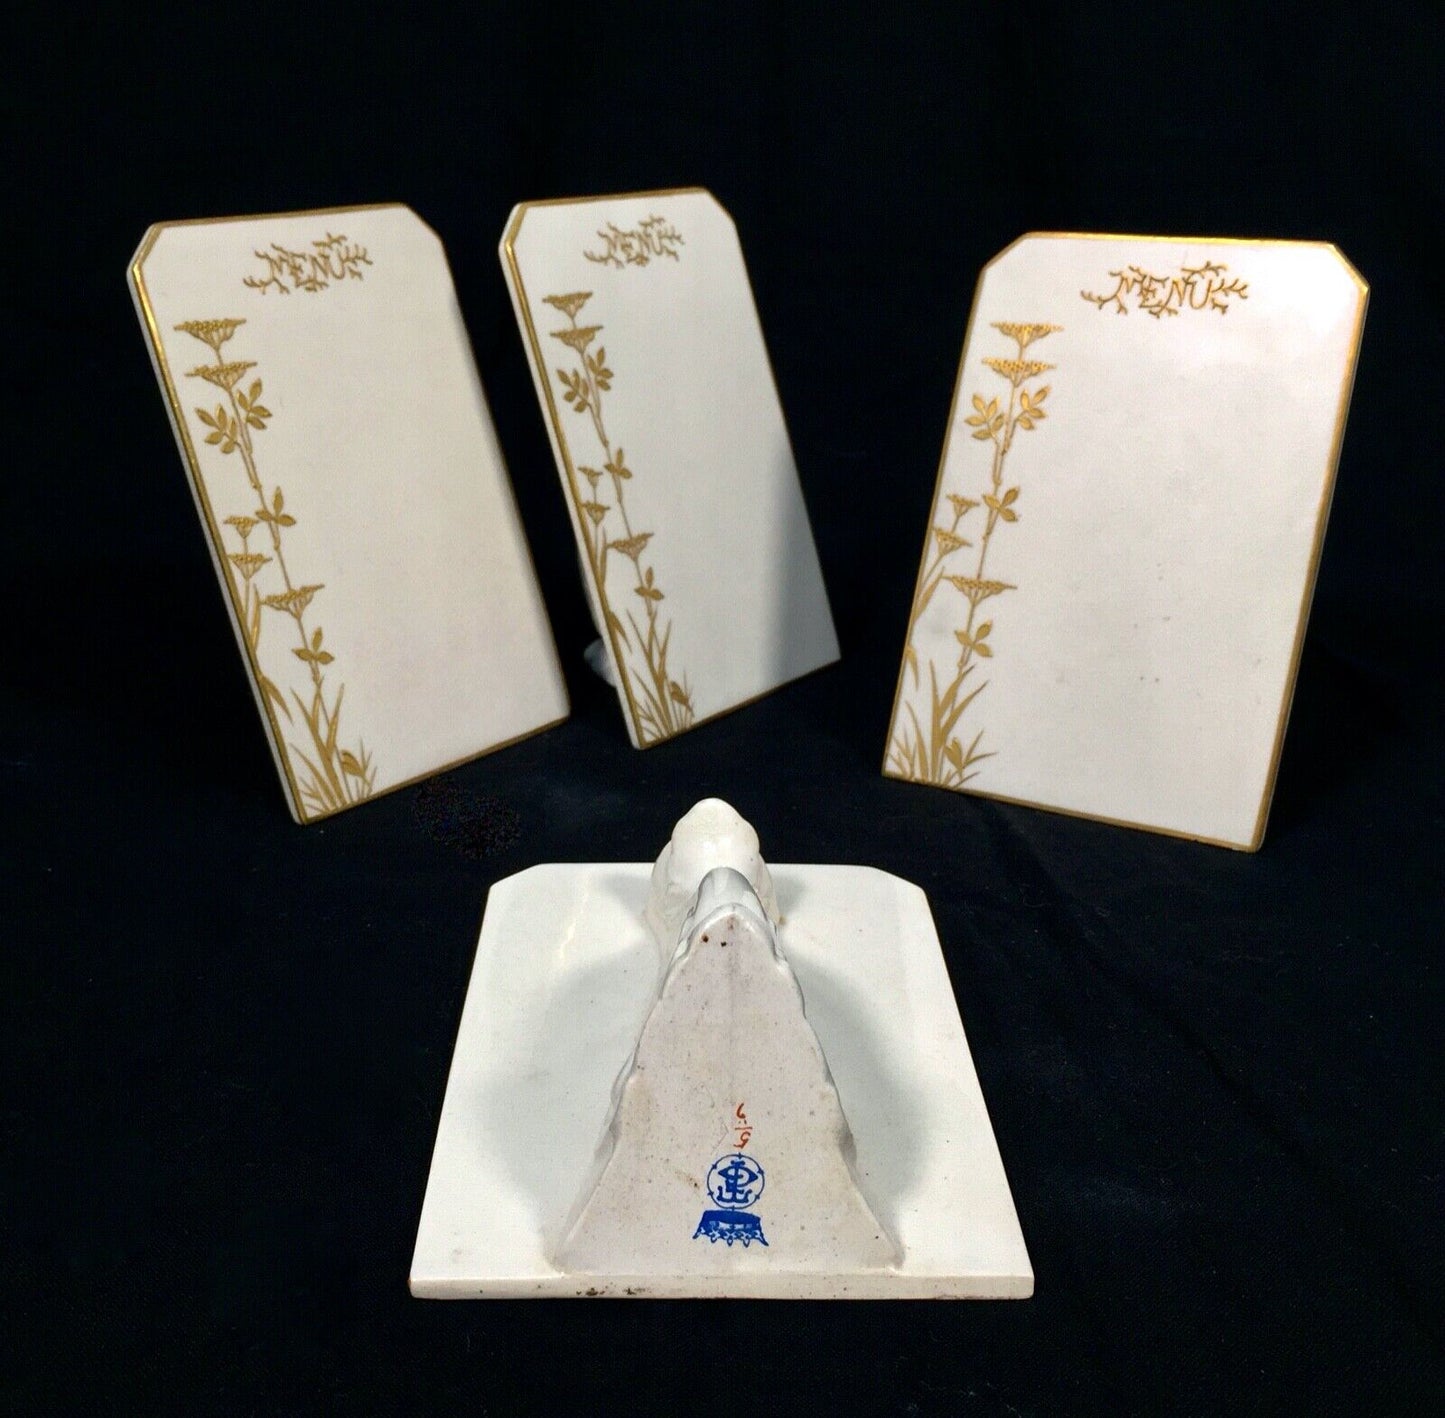 Antique Victorian Taylor Tunnicliffe & Co Ceramic Menu & Flower Holders Set of 4